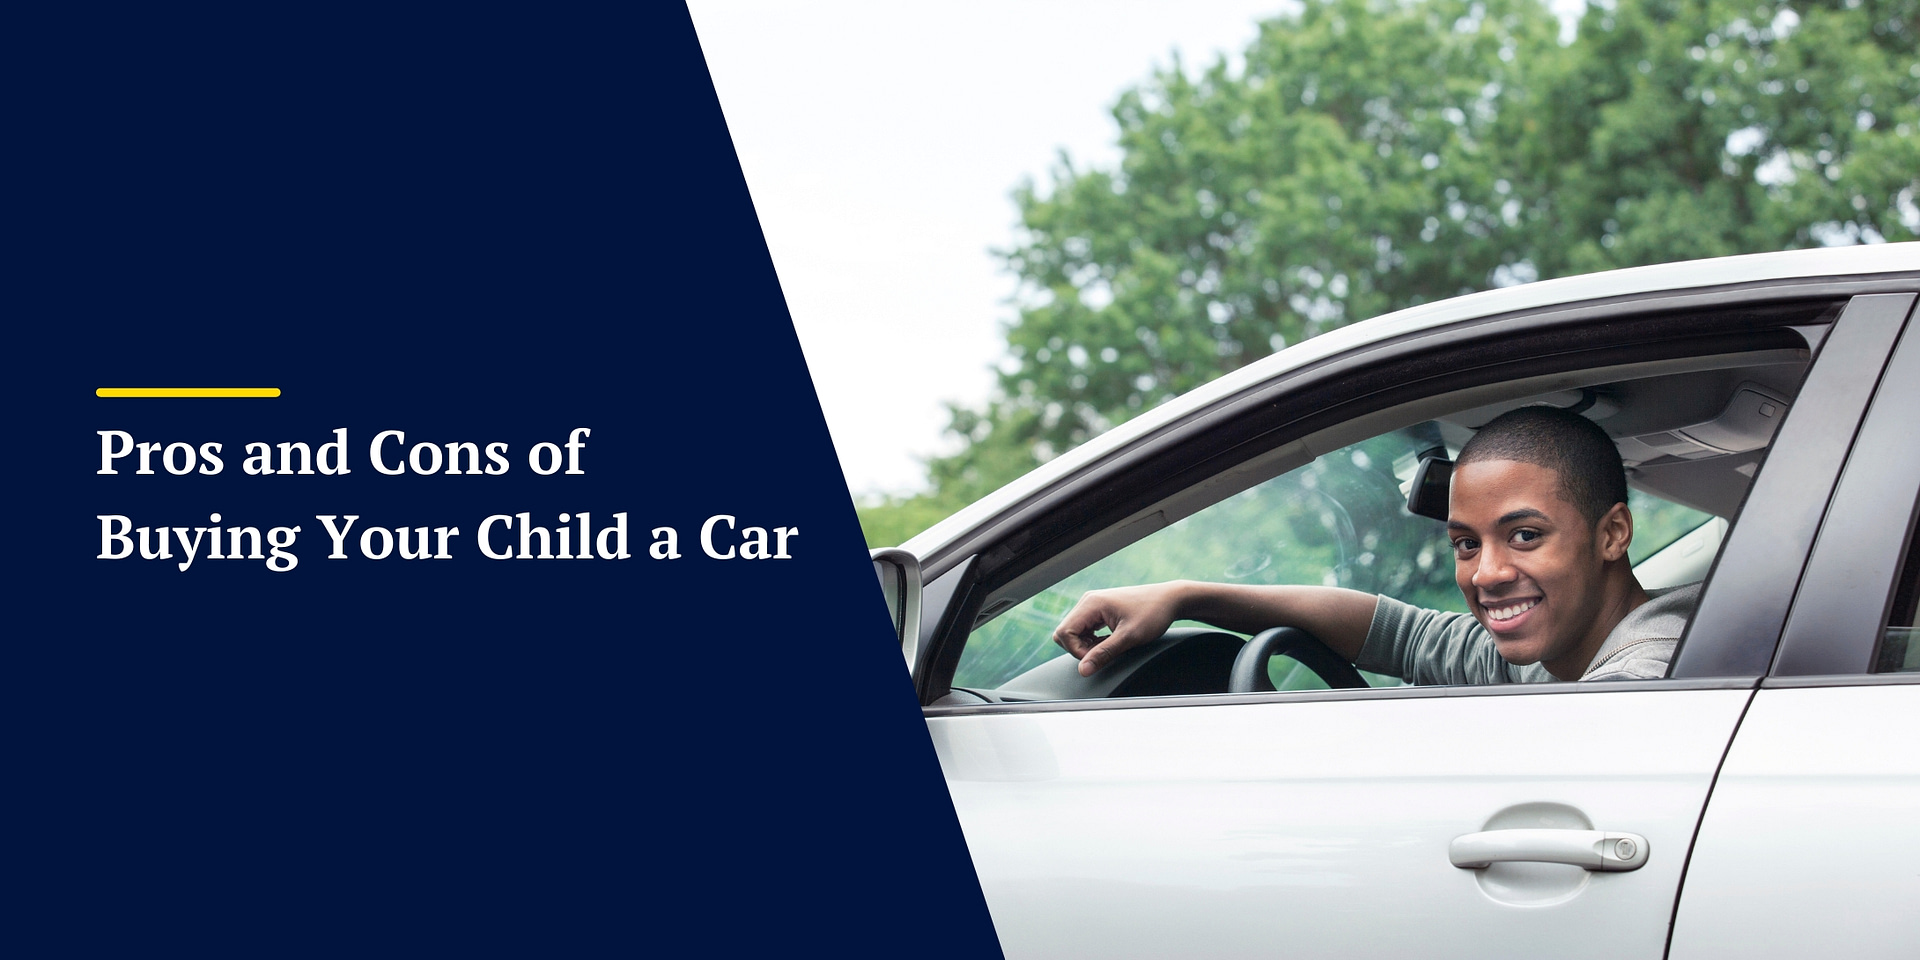 Pros and Cons of Buying Your Child a Car